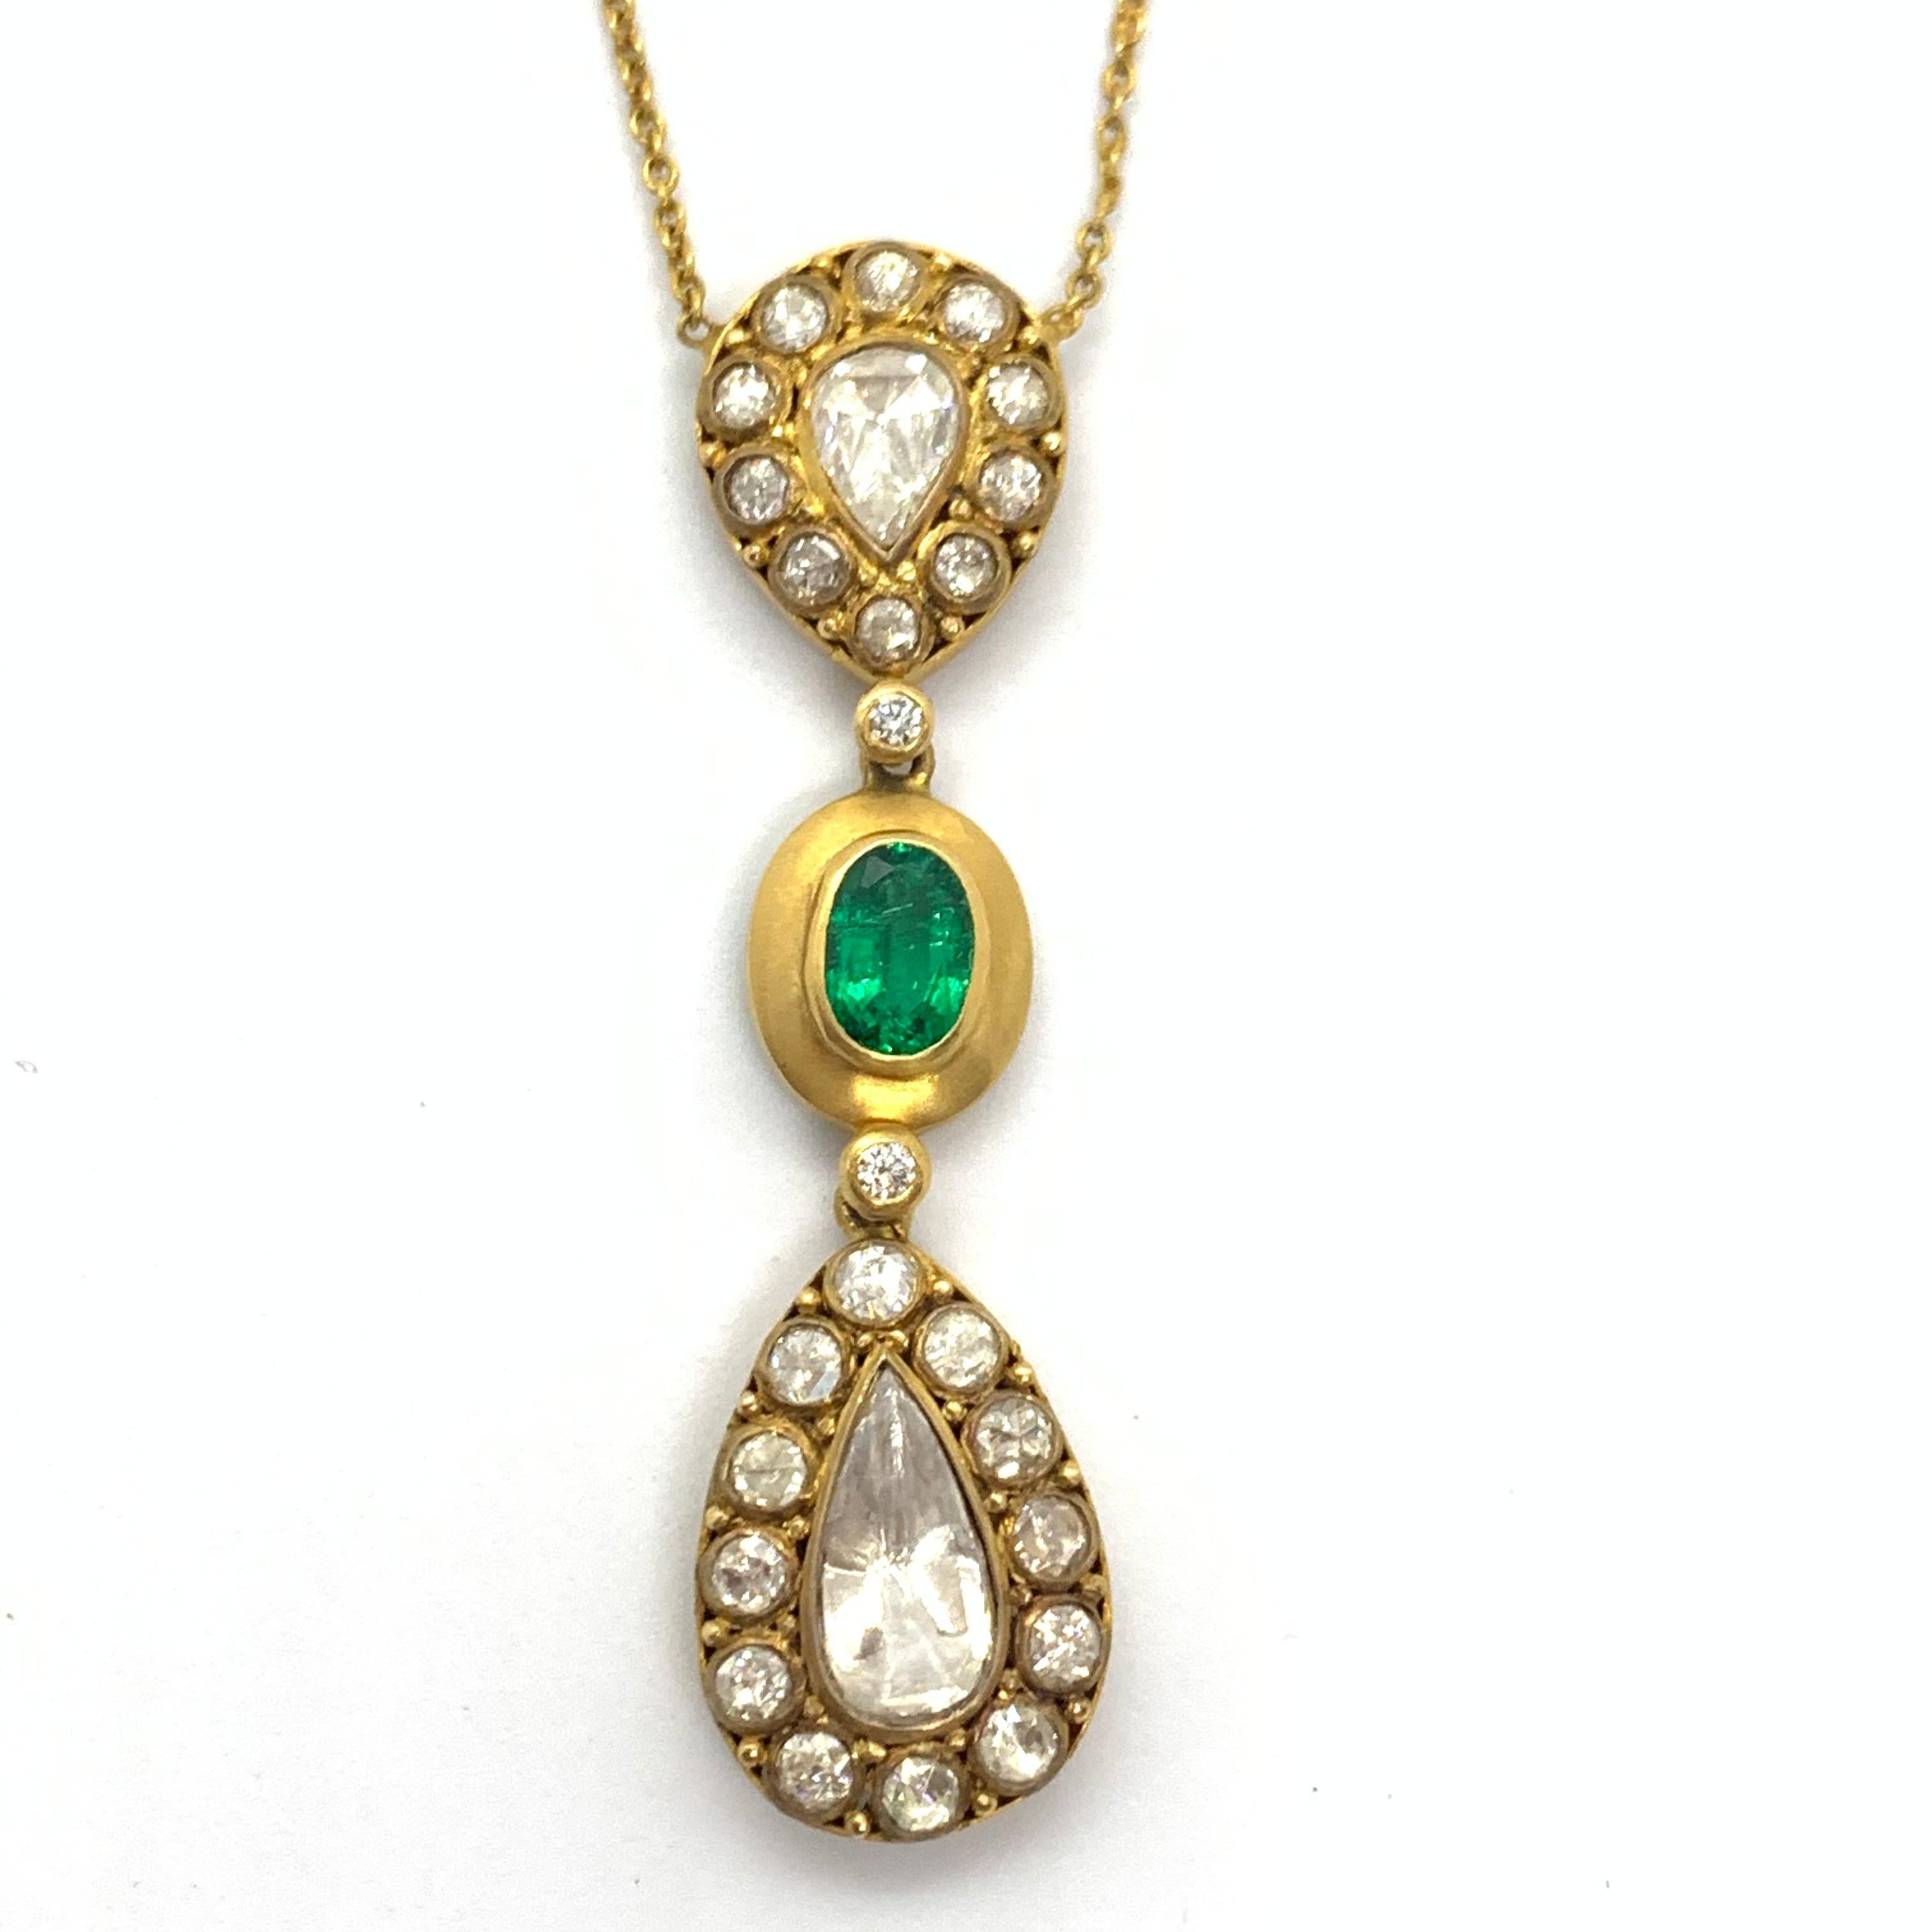 An exquisite necklace with a combination of Diamond Rose Cuts and a beautiful Emerald Oval in the center. The emerald is from the Zambian Mines and is a very nice vibrant Green Colour. The pendant is hung in a 18K Gold chain with round diamond rose